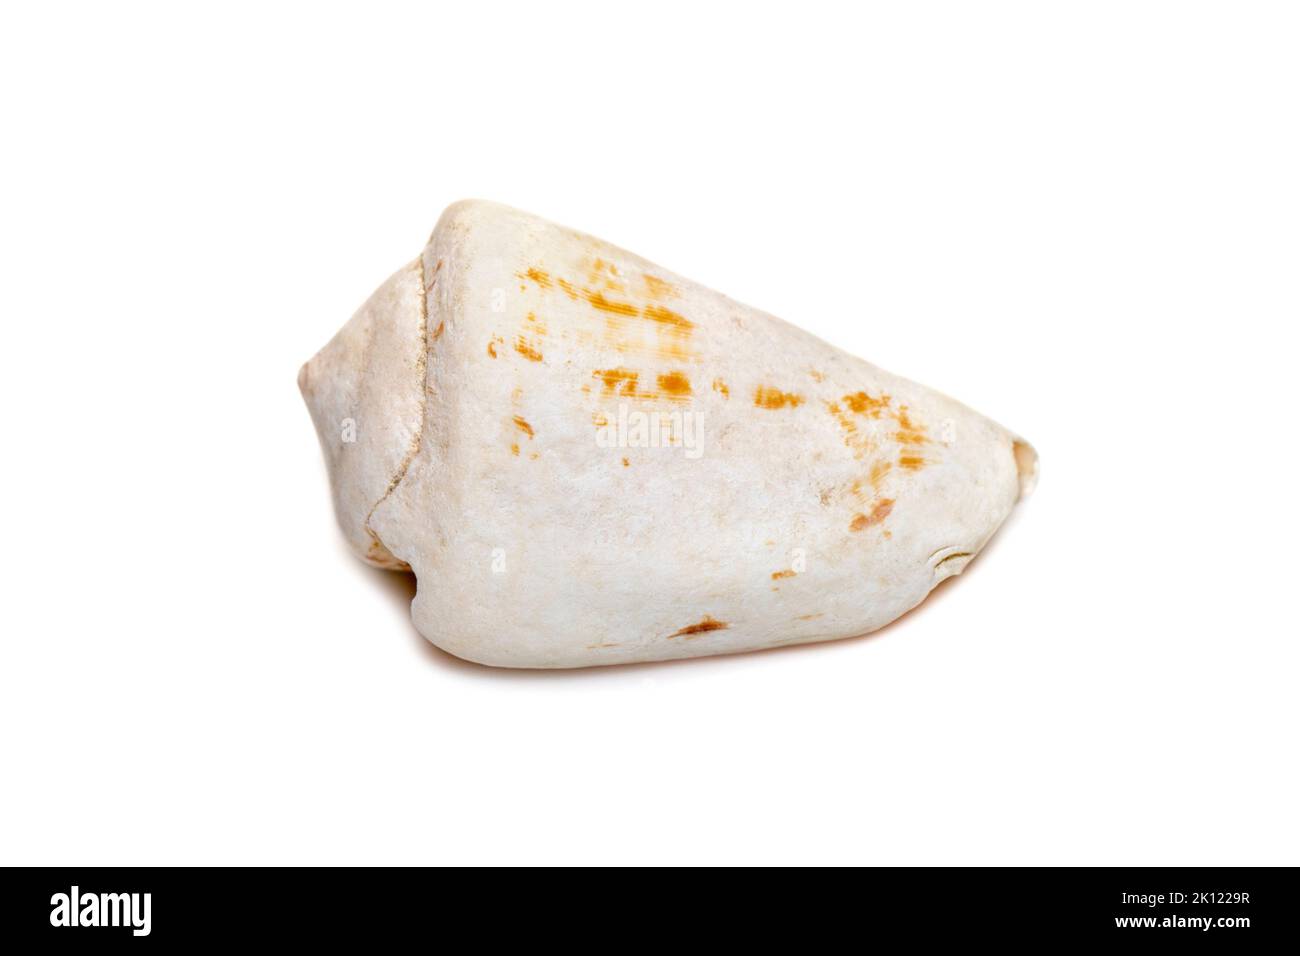 Image of white conch shell isolated on white background. Undersea Animals. Sea Shells. Stock Photo